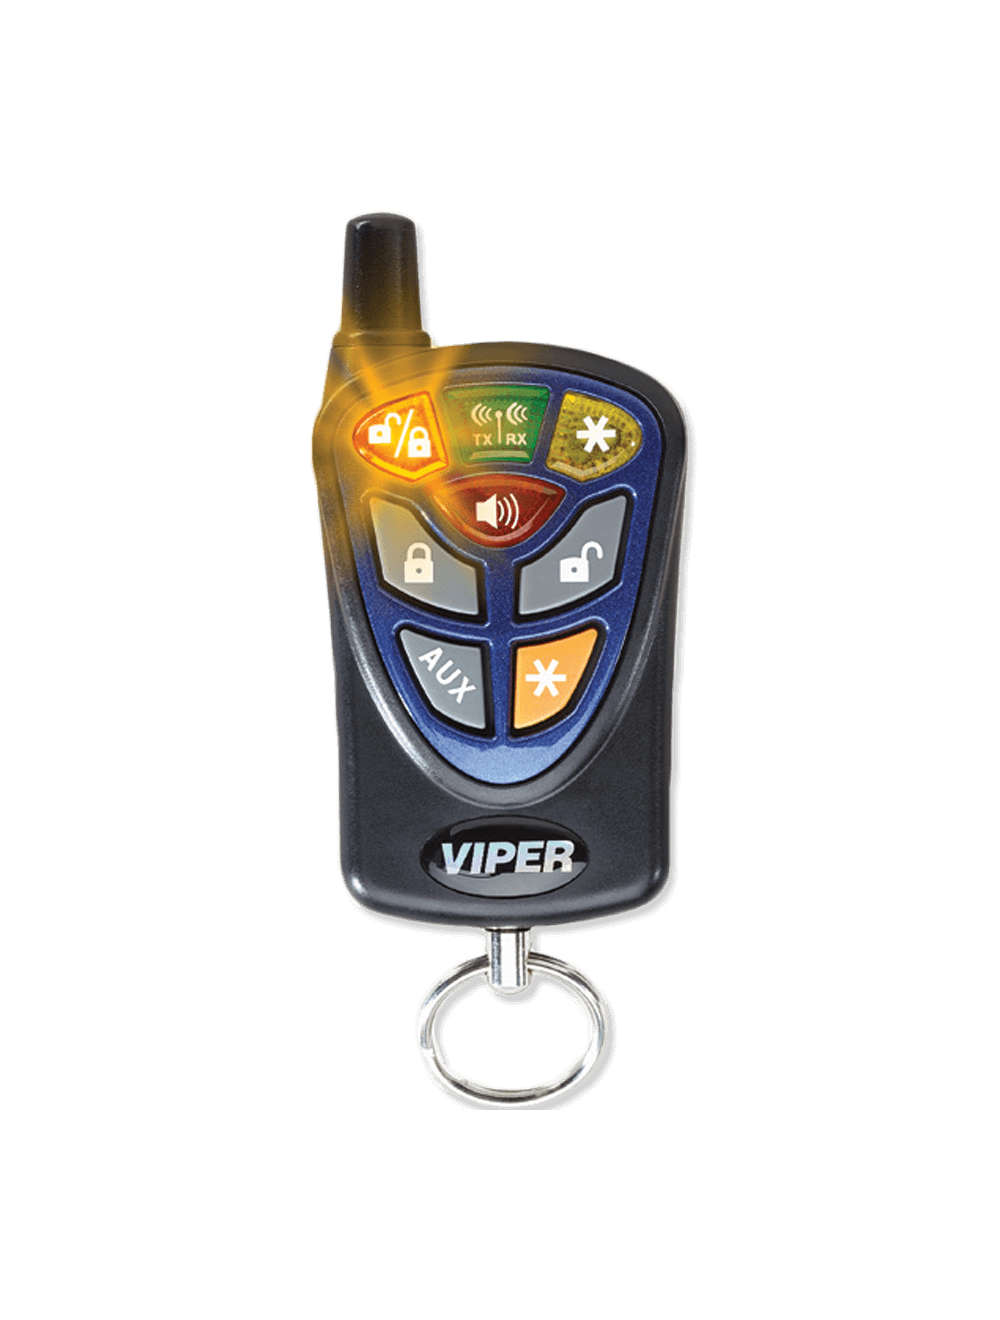 Directed 488V Viper LED 2-Way Replacement Remote